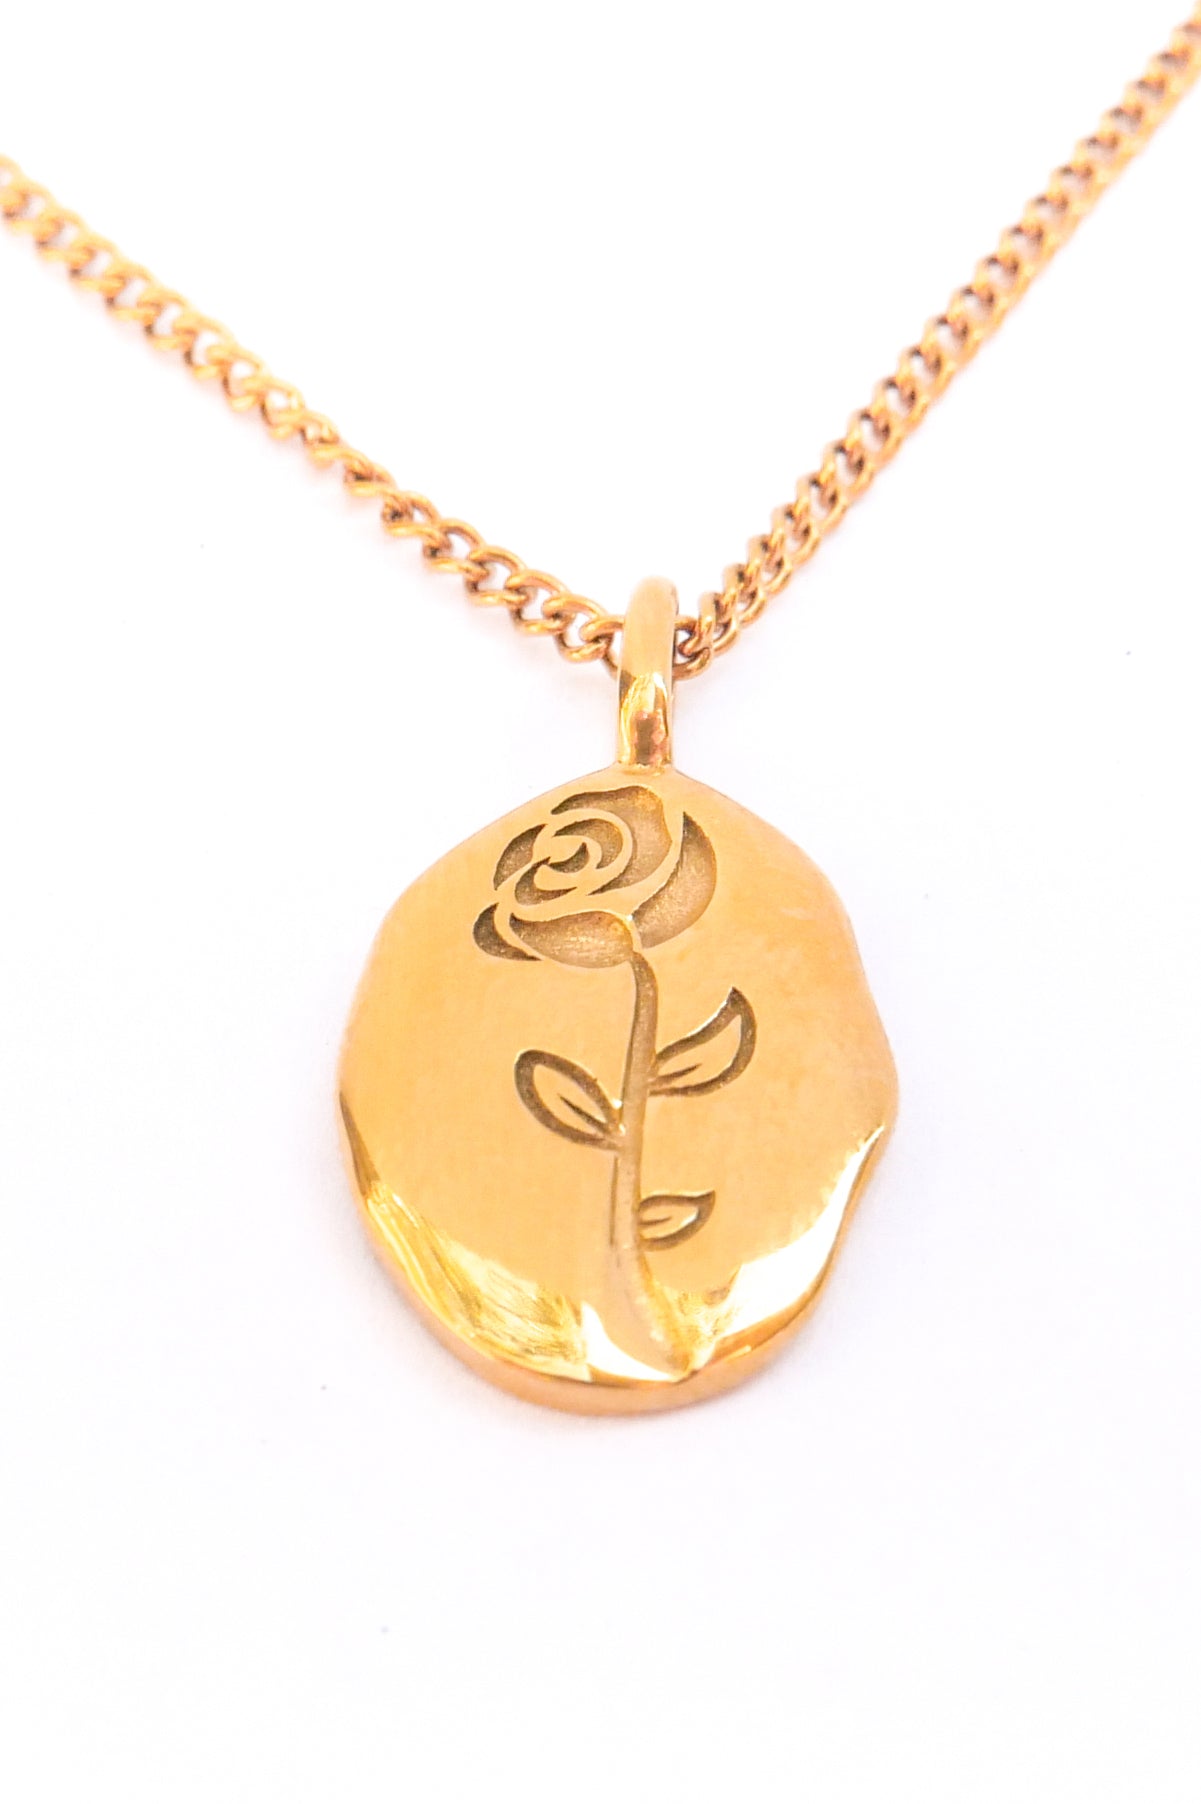 Close up view of embossed rosa necklace against a white backdrop